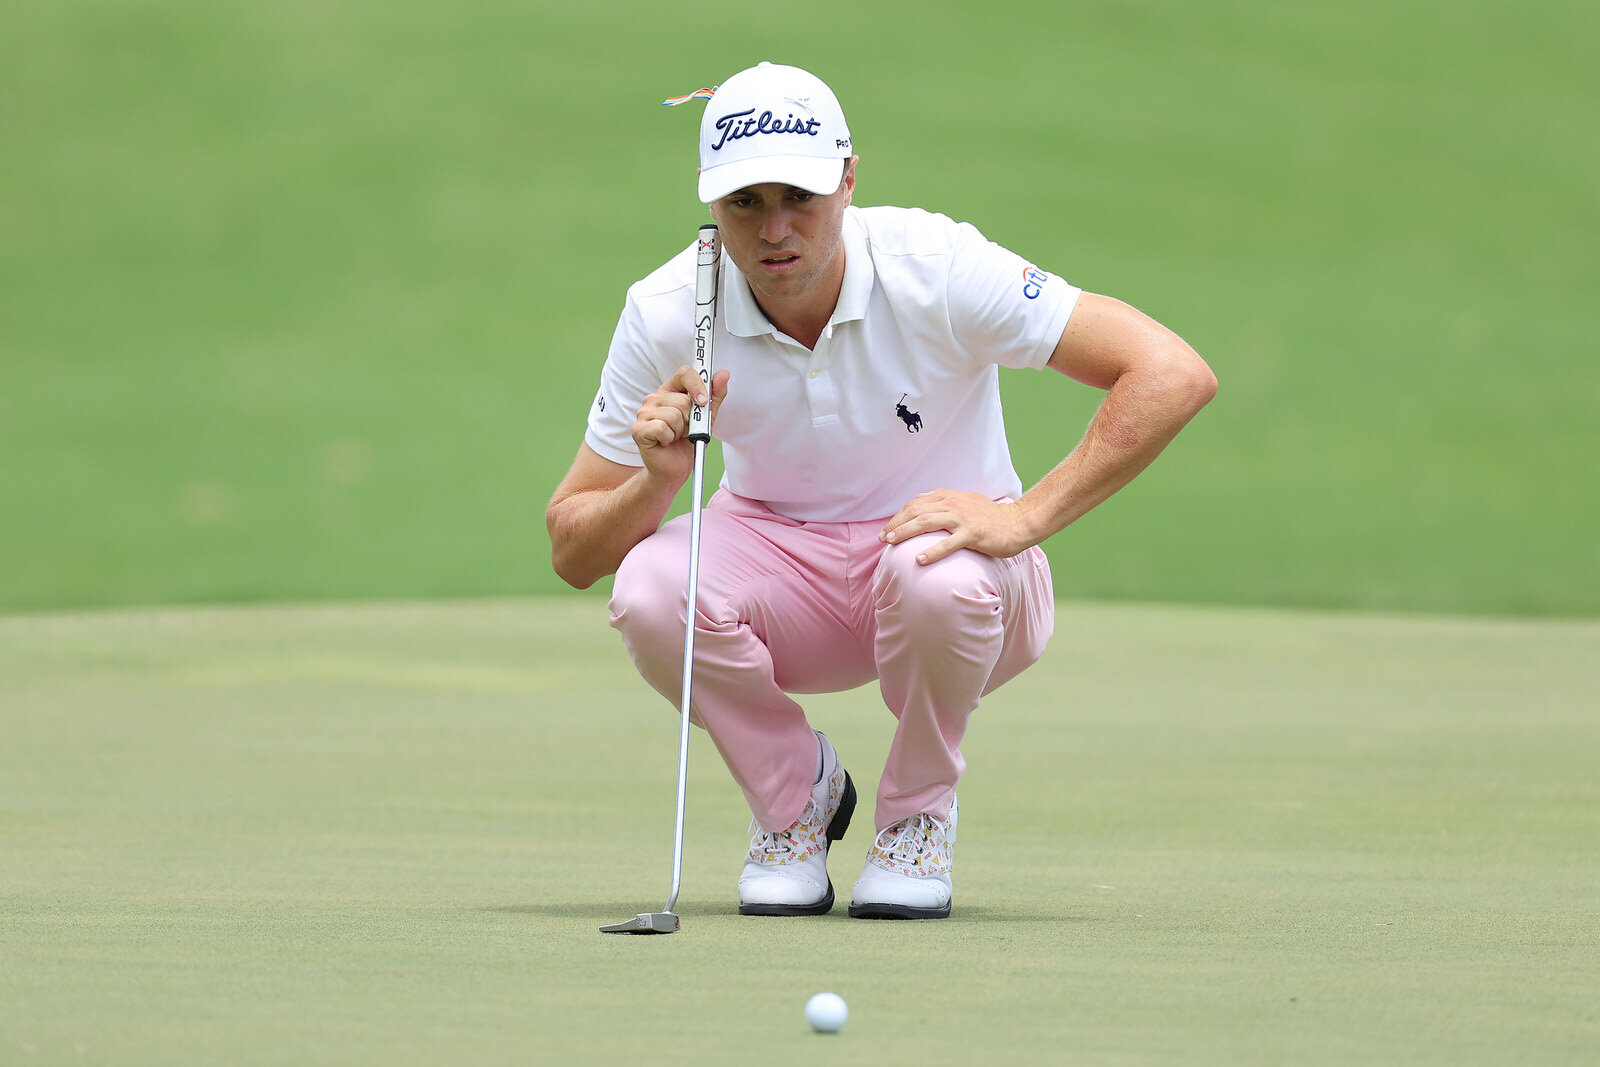  MEMPHIS, TENNESSEE - AUGUST 02:  Justin Thomas of the United States lines up a birdie putt on the first green during the final round of the World Golf Championship-FedEx St Jude Invitational at TPC Southwind on August 02, 2020 in Memphis, Tennessee.